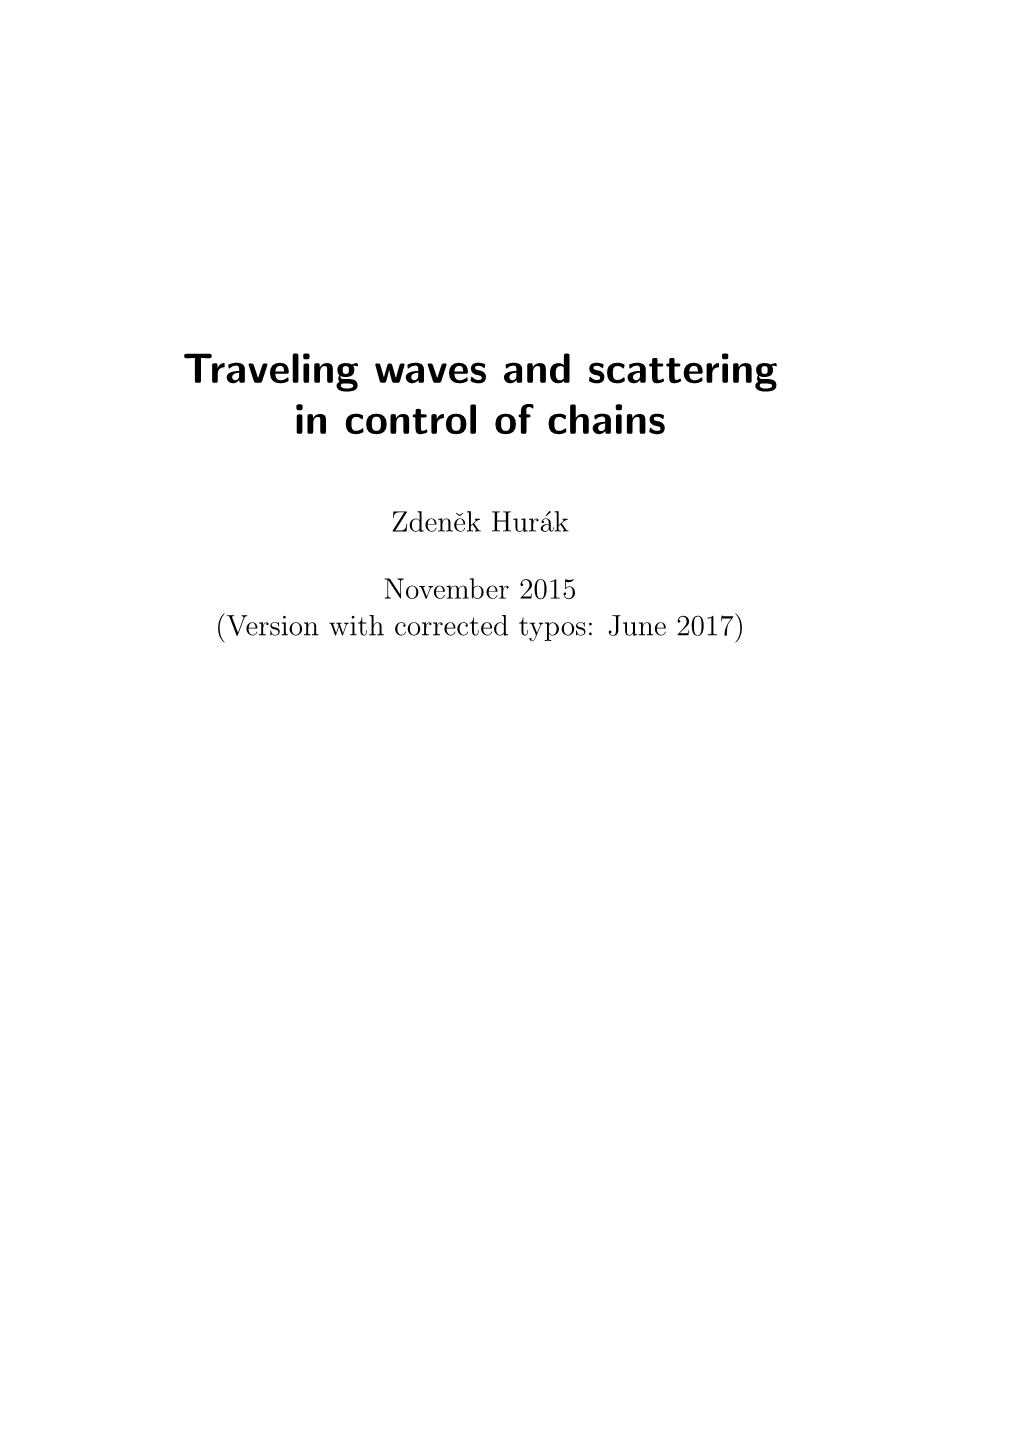 Traveling Waves and Scattering in Control of Chains